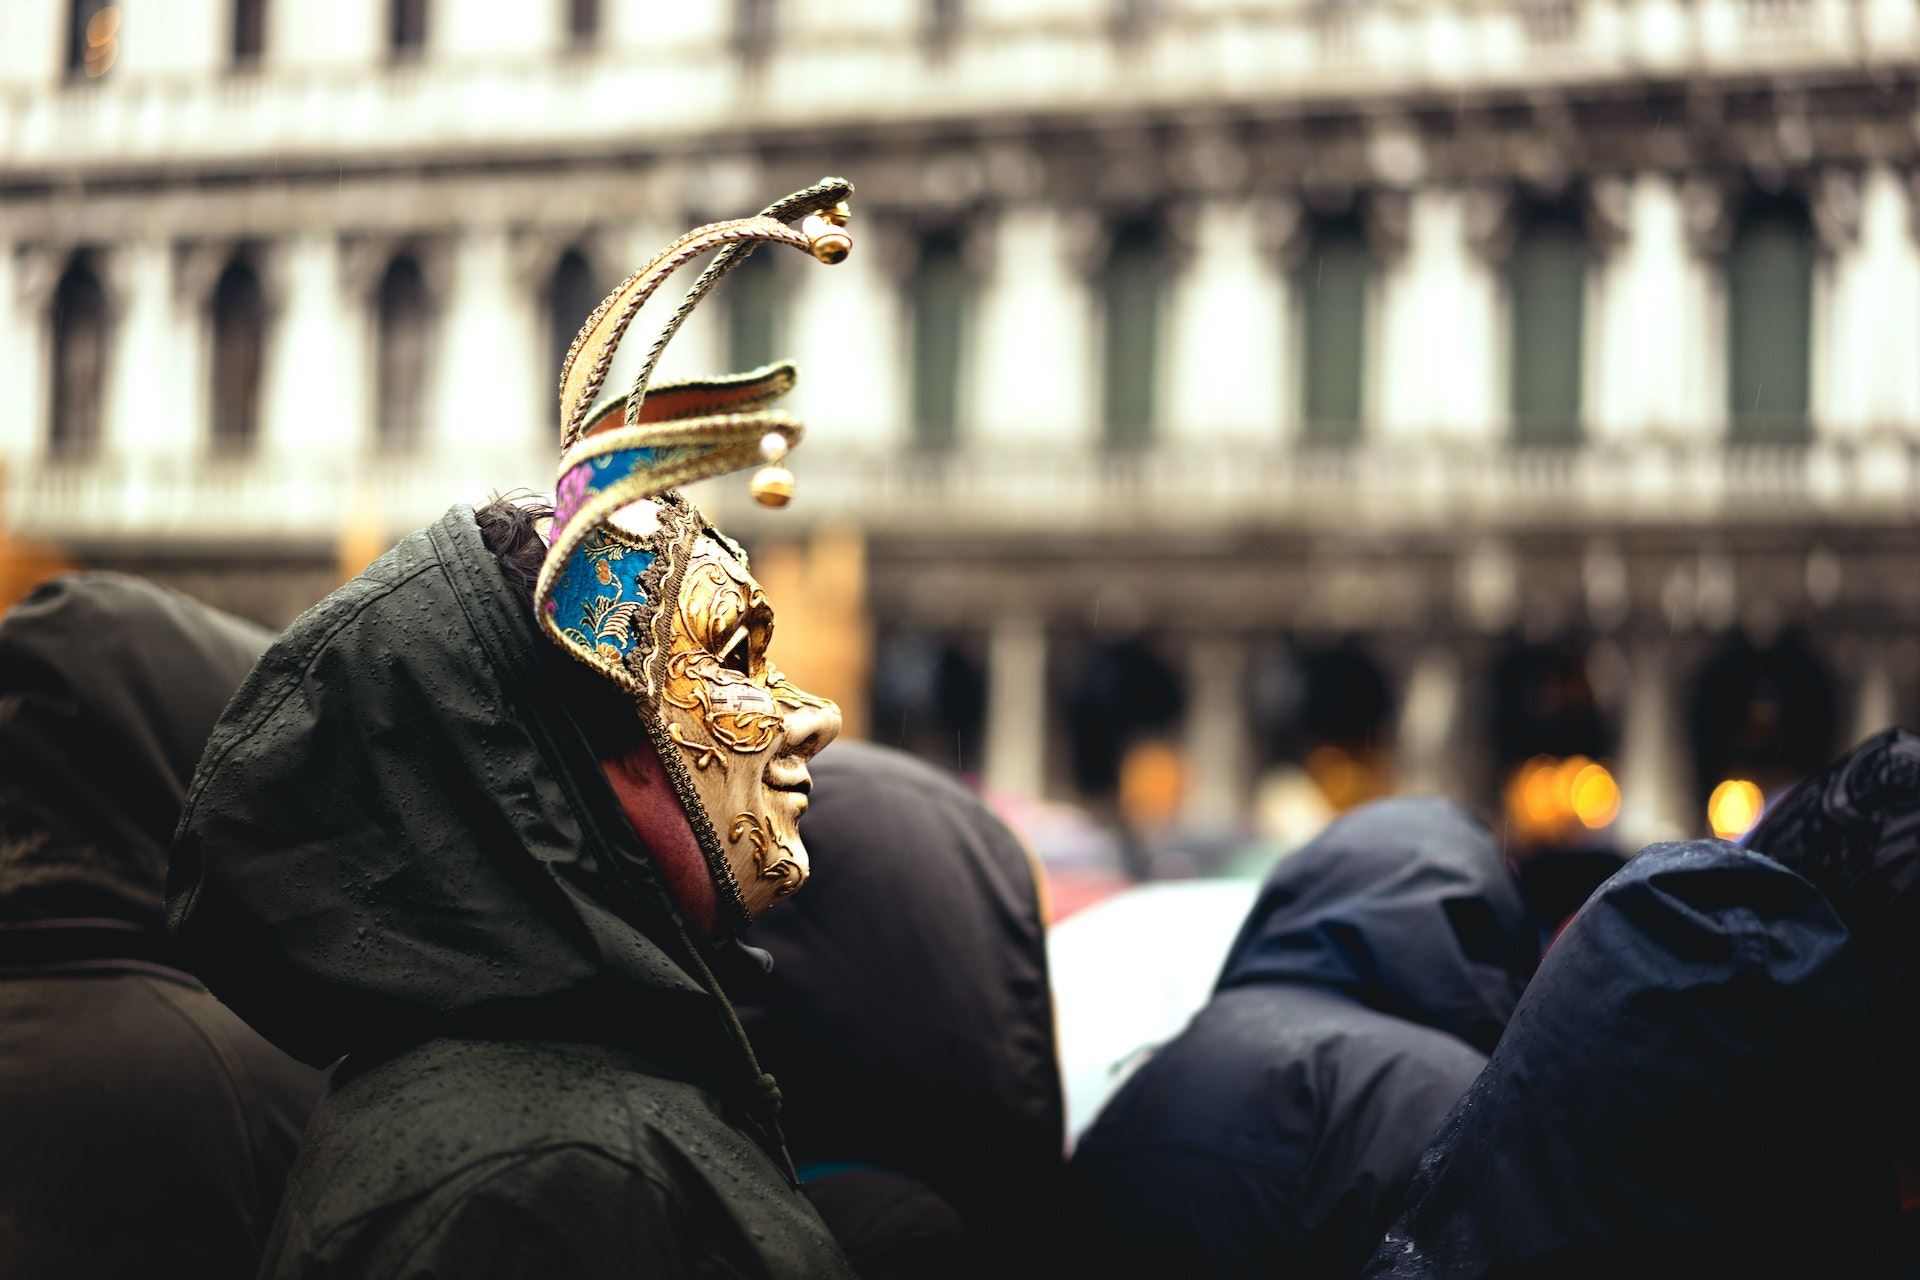 A man wearing a venetian mask in a crowd during the Venice Carnival